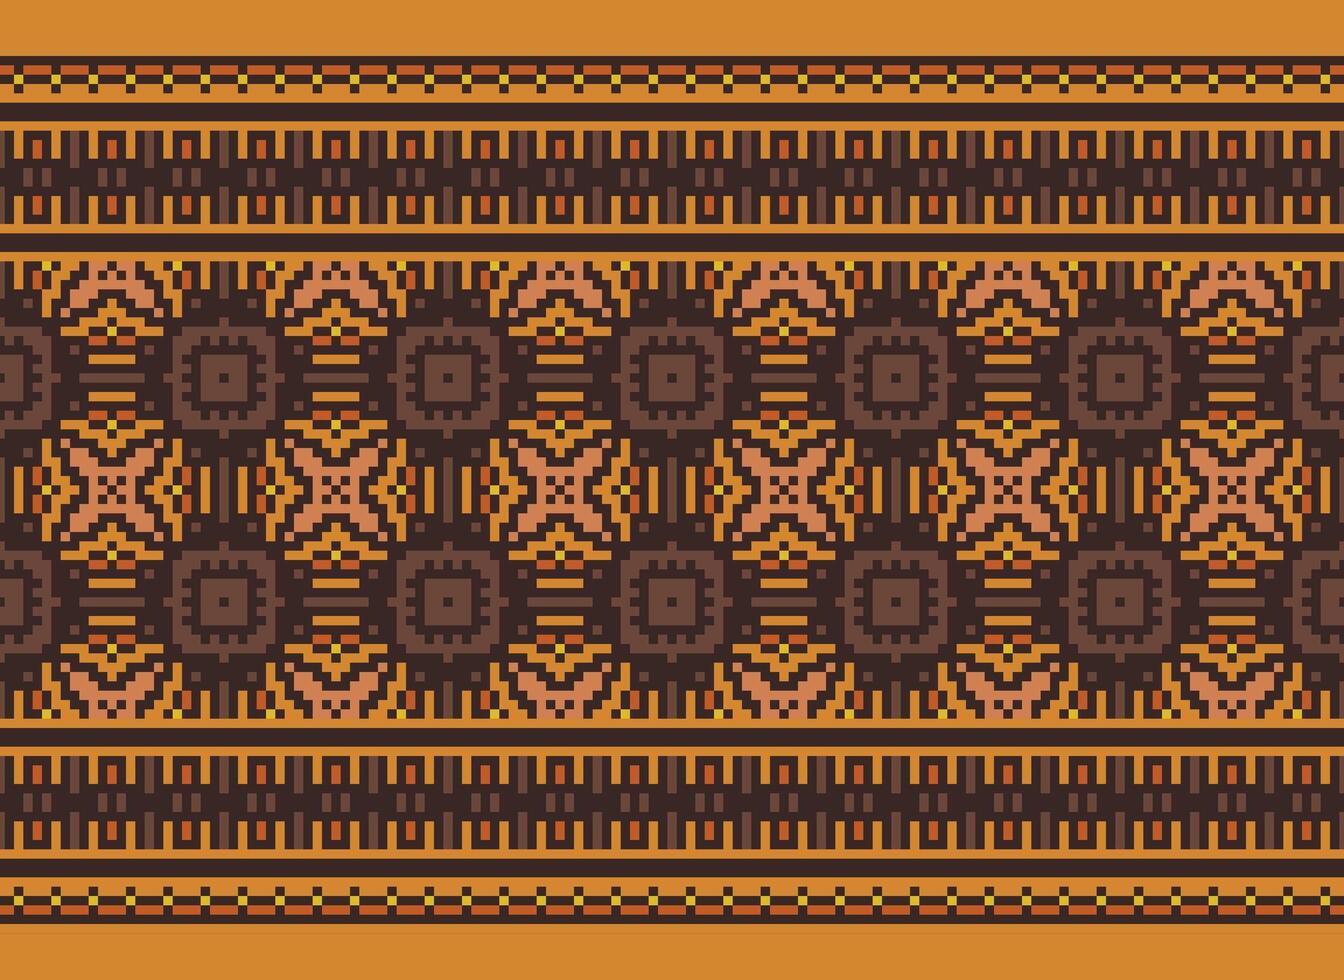 Pixel Cross Stitch pattern with Floral Designs. Traditional cross stitch needlework. Geometric Ethnic pattern, Embroidery, Textile ornamentation, fabric, Hand stitched pattern, pixel art. vector